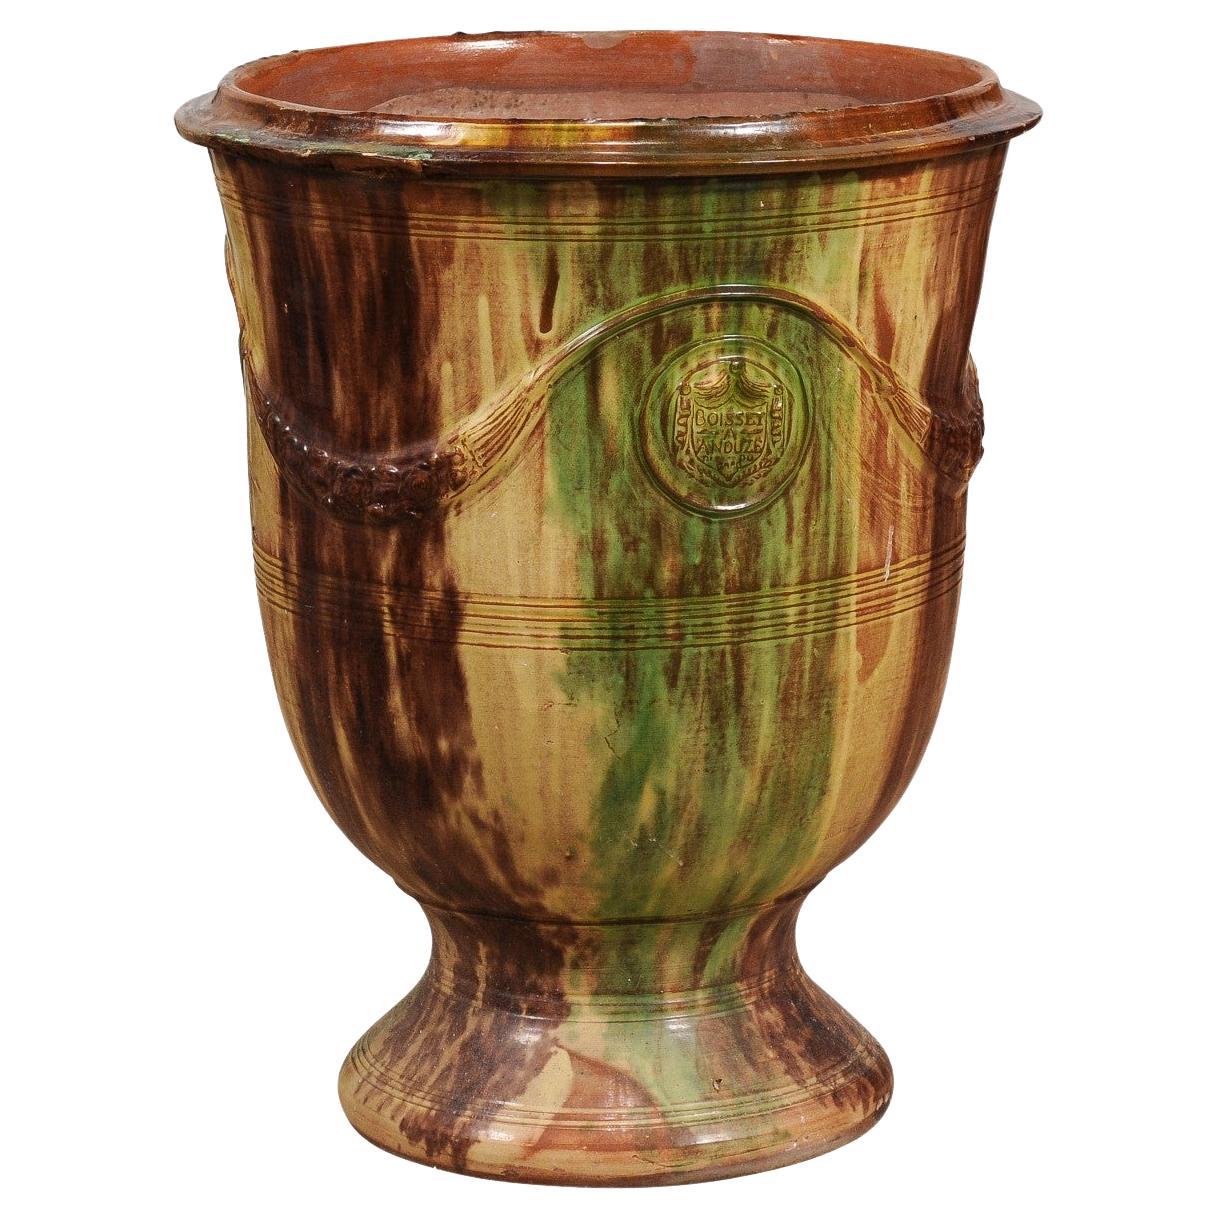 Large French Boisset Anduze Jar with Brown, Green Glaze and Swags, 21st Century For Sale